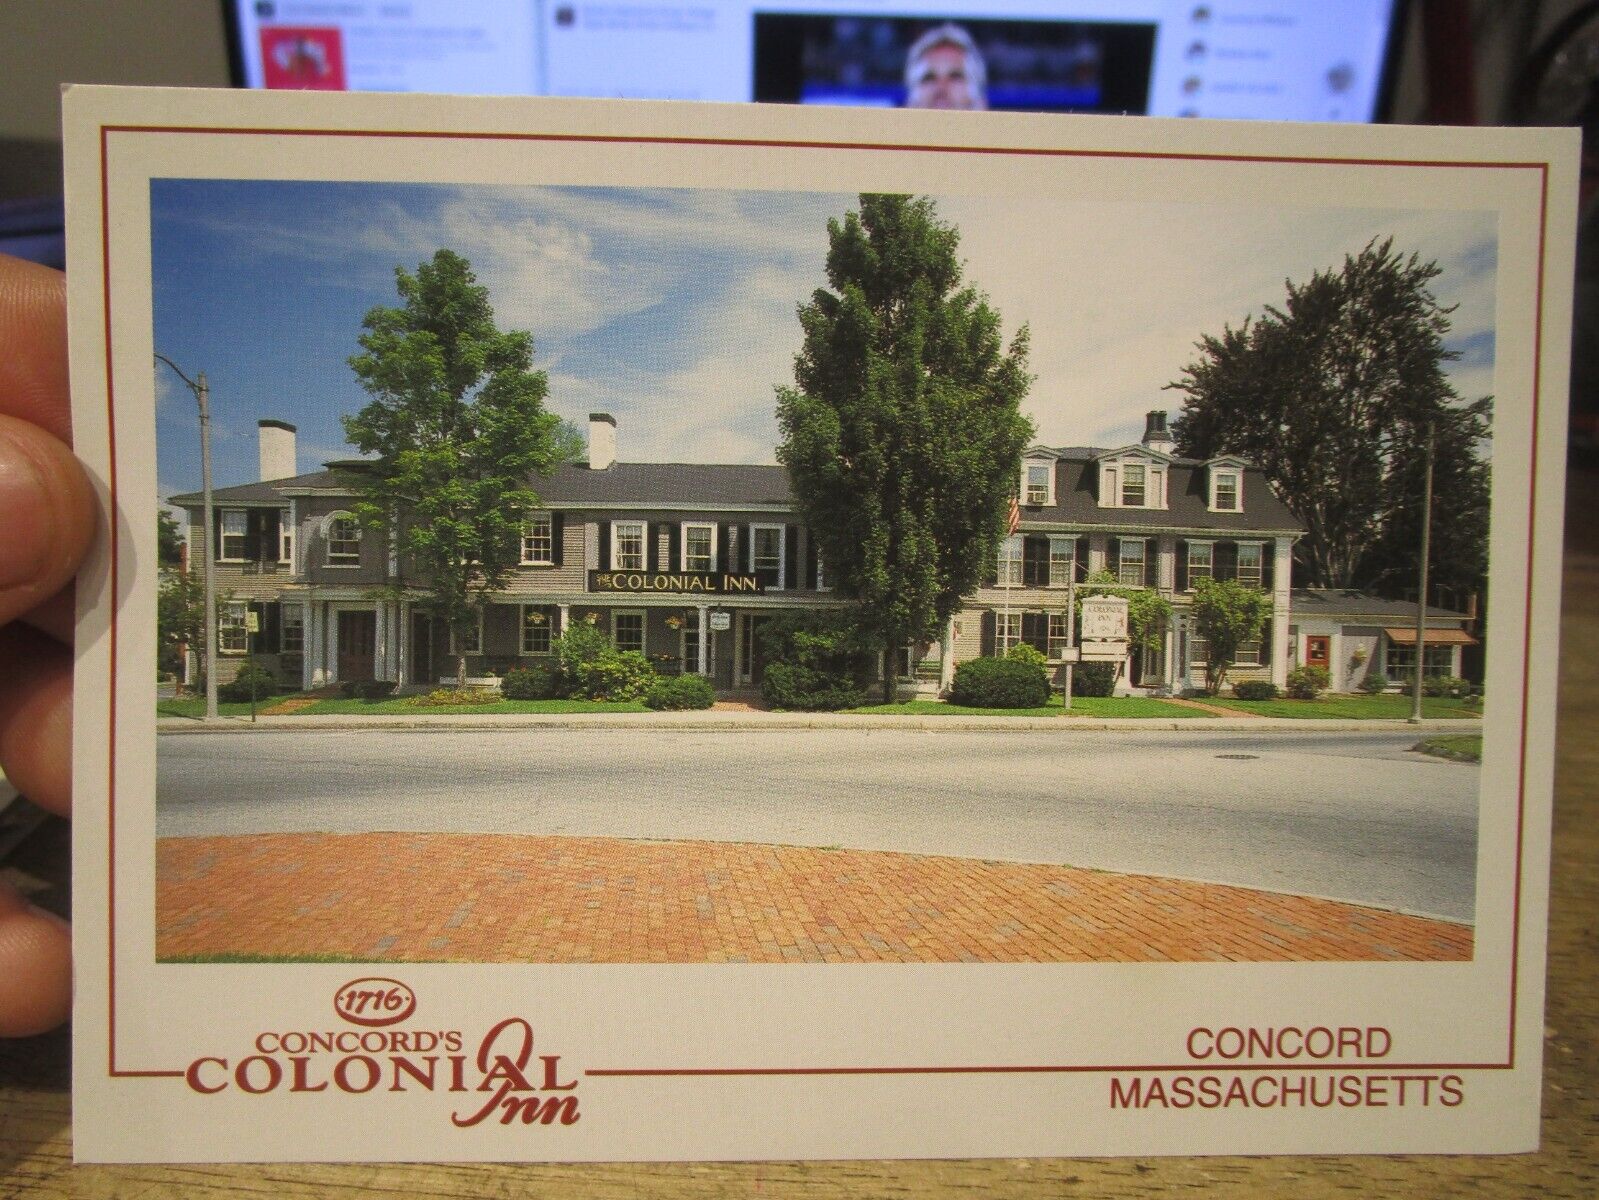 N1 MASSACHUSETTS Postcard Concord Colonial Inn Monument Square Afternoon Tea